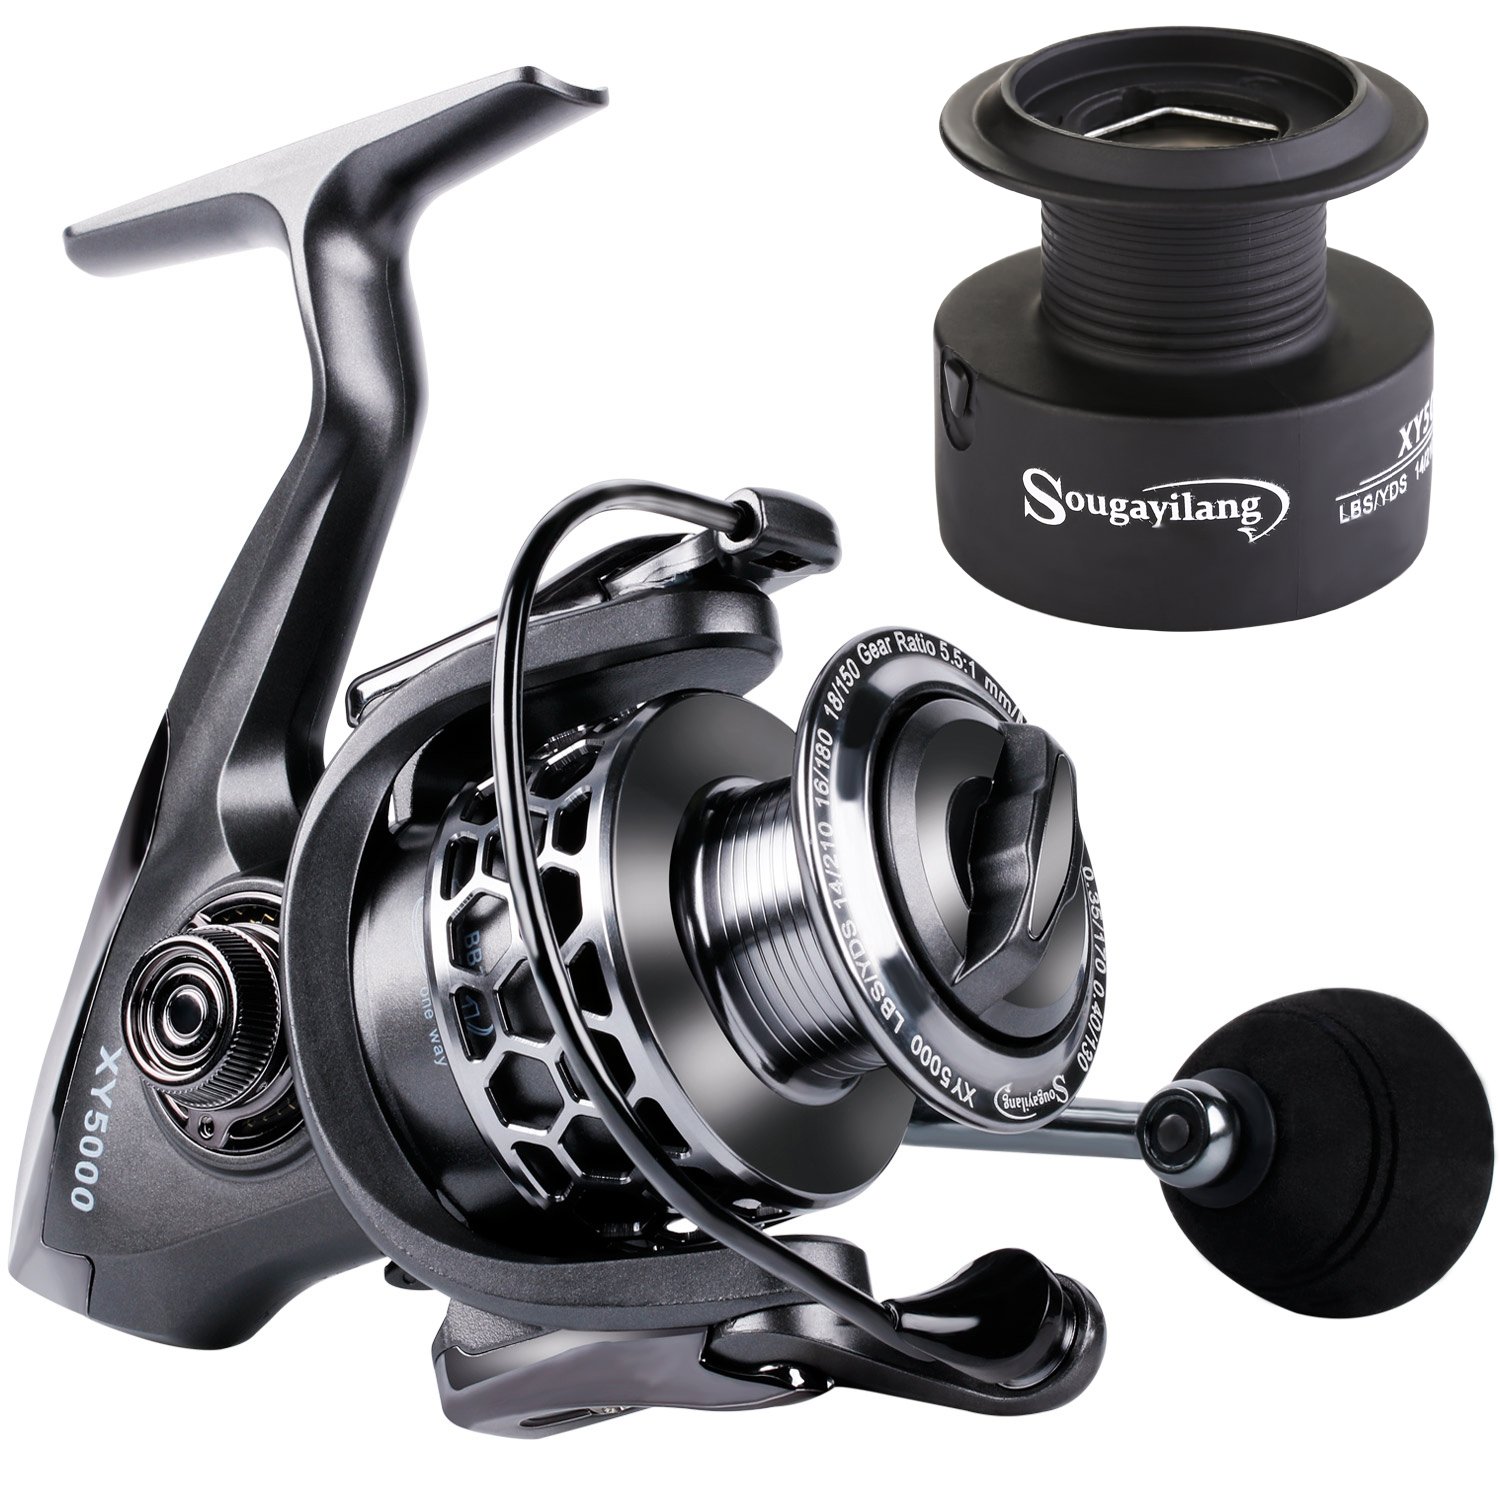  Spinning Reel, 10+1 Stainless Steel Precise Ball Bearings,  Aluminum Spool & CNC Machined Handle Fishing Reel (Color : Black, Size :  3000) : Sports & Outdoors